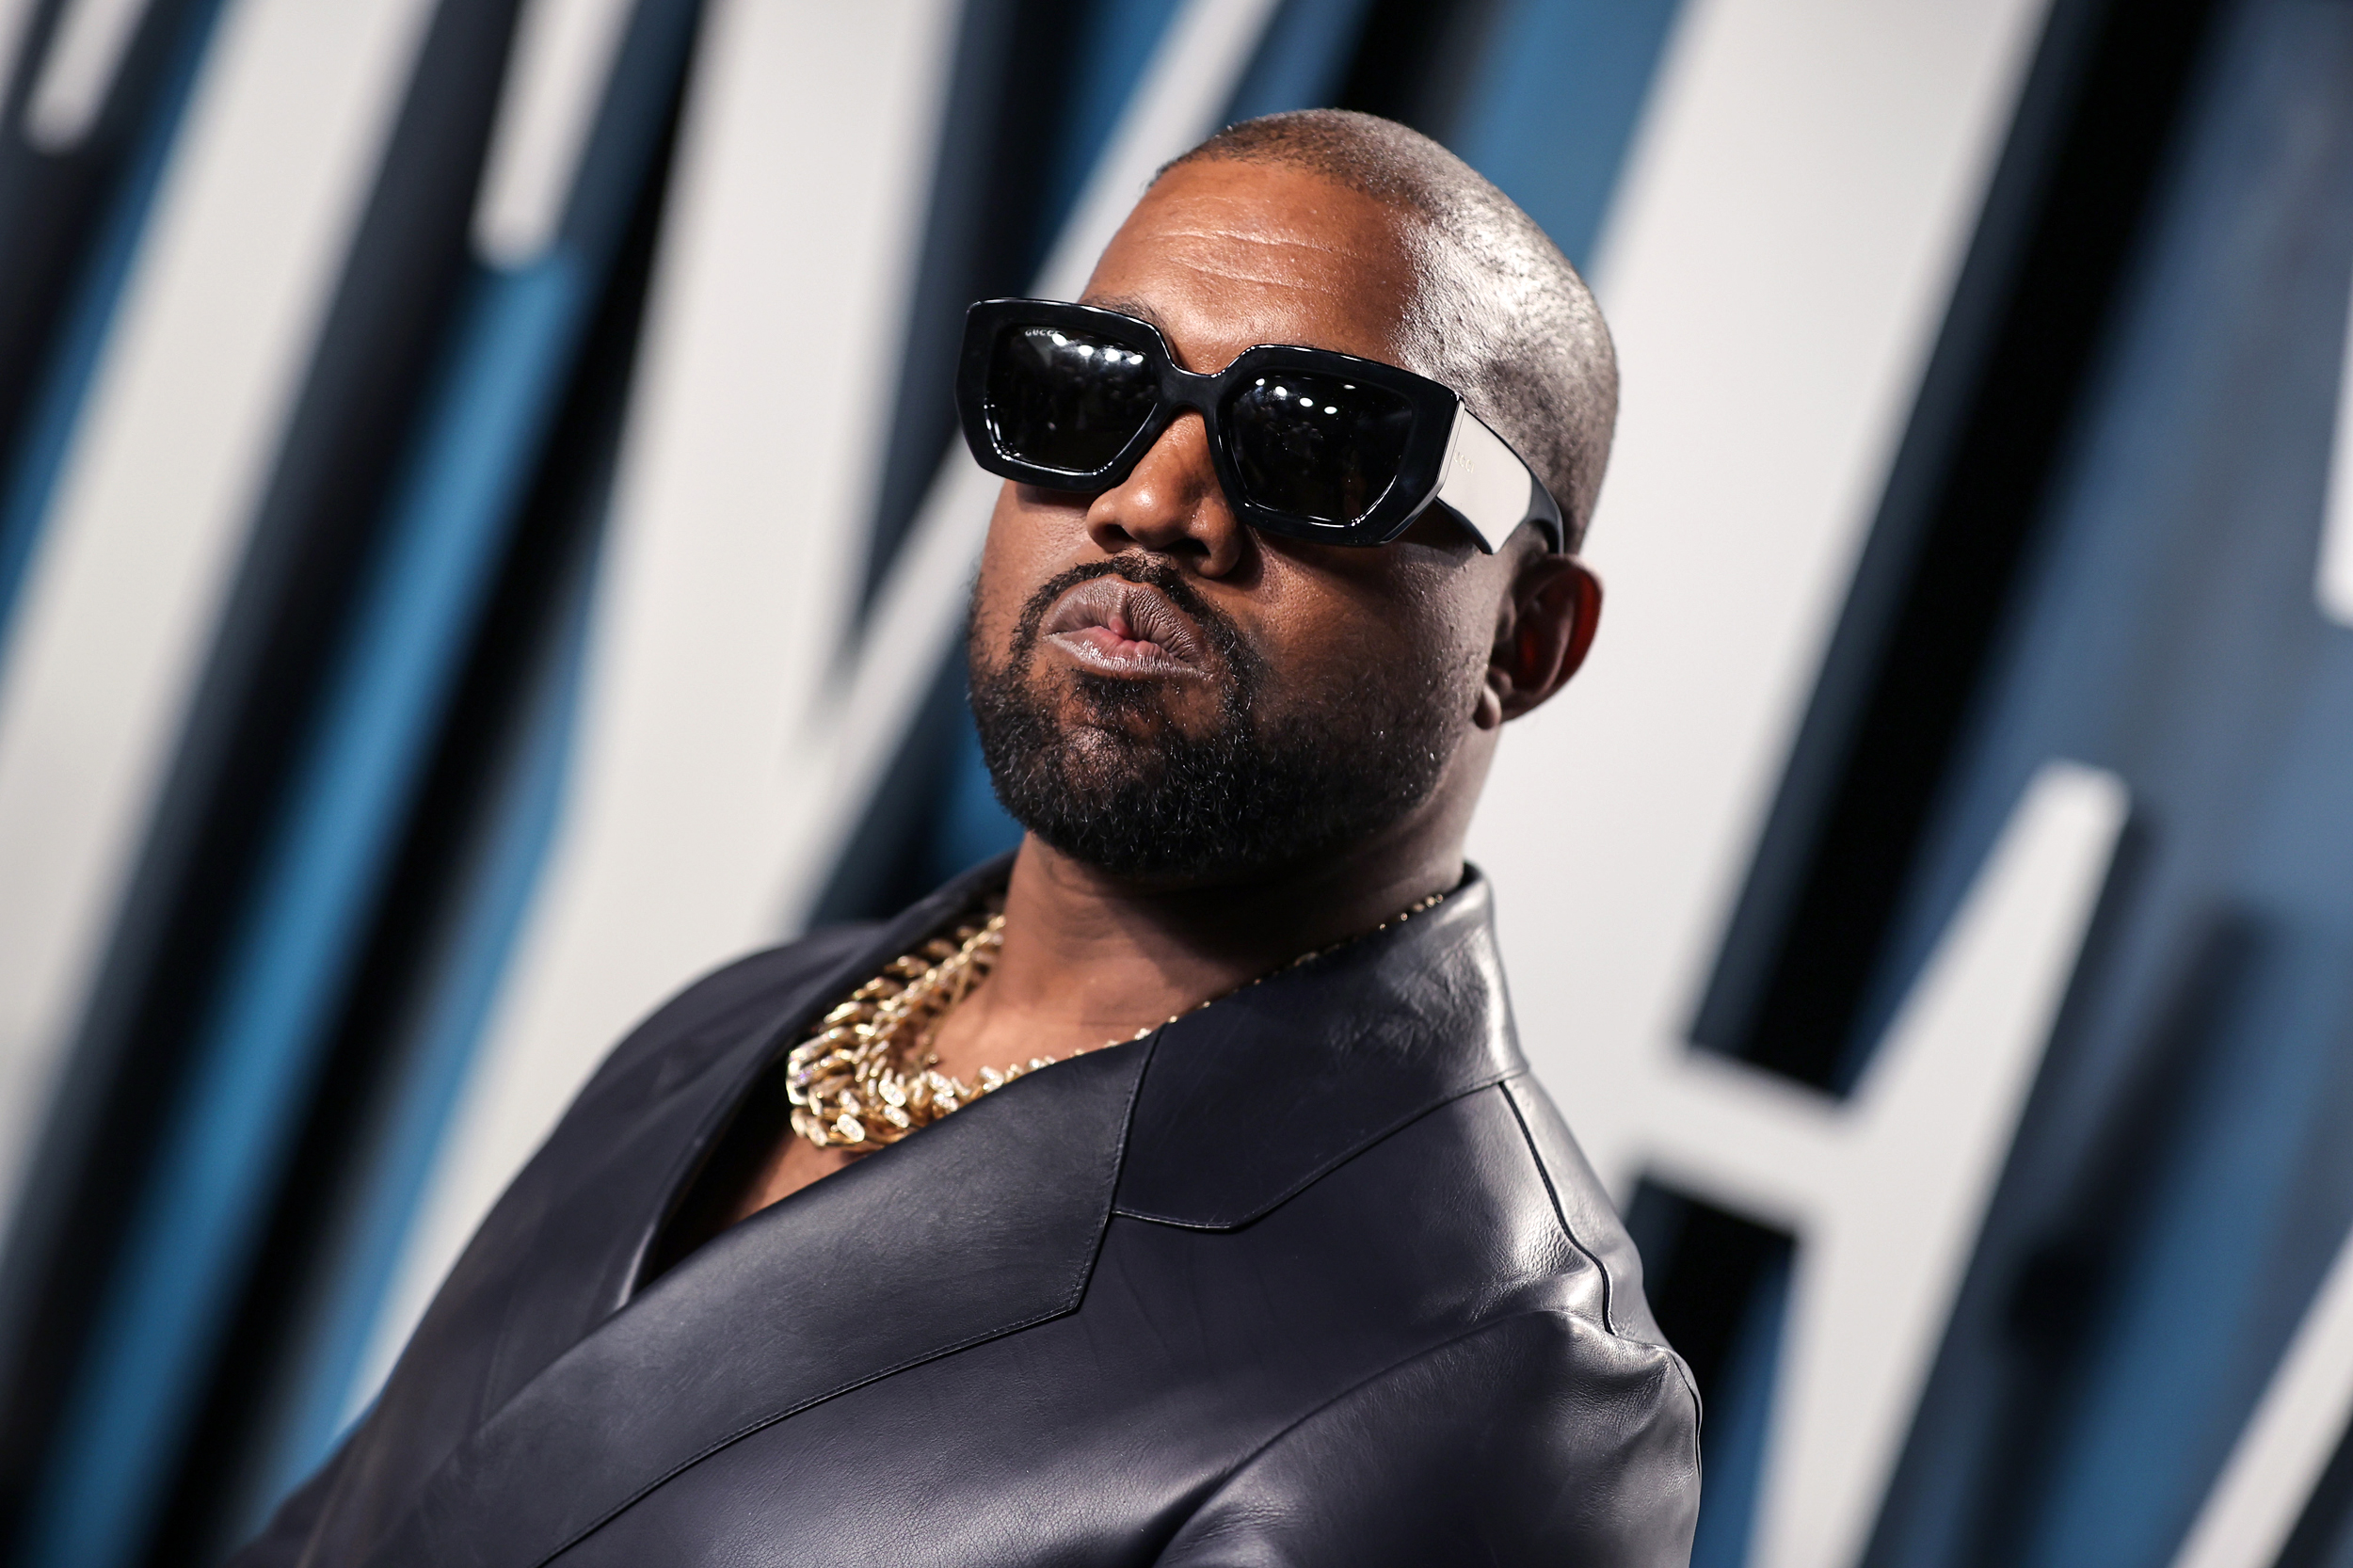 Kanye West To Buy Parler - The Deal With Uncancelable Free Speech Platform